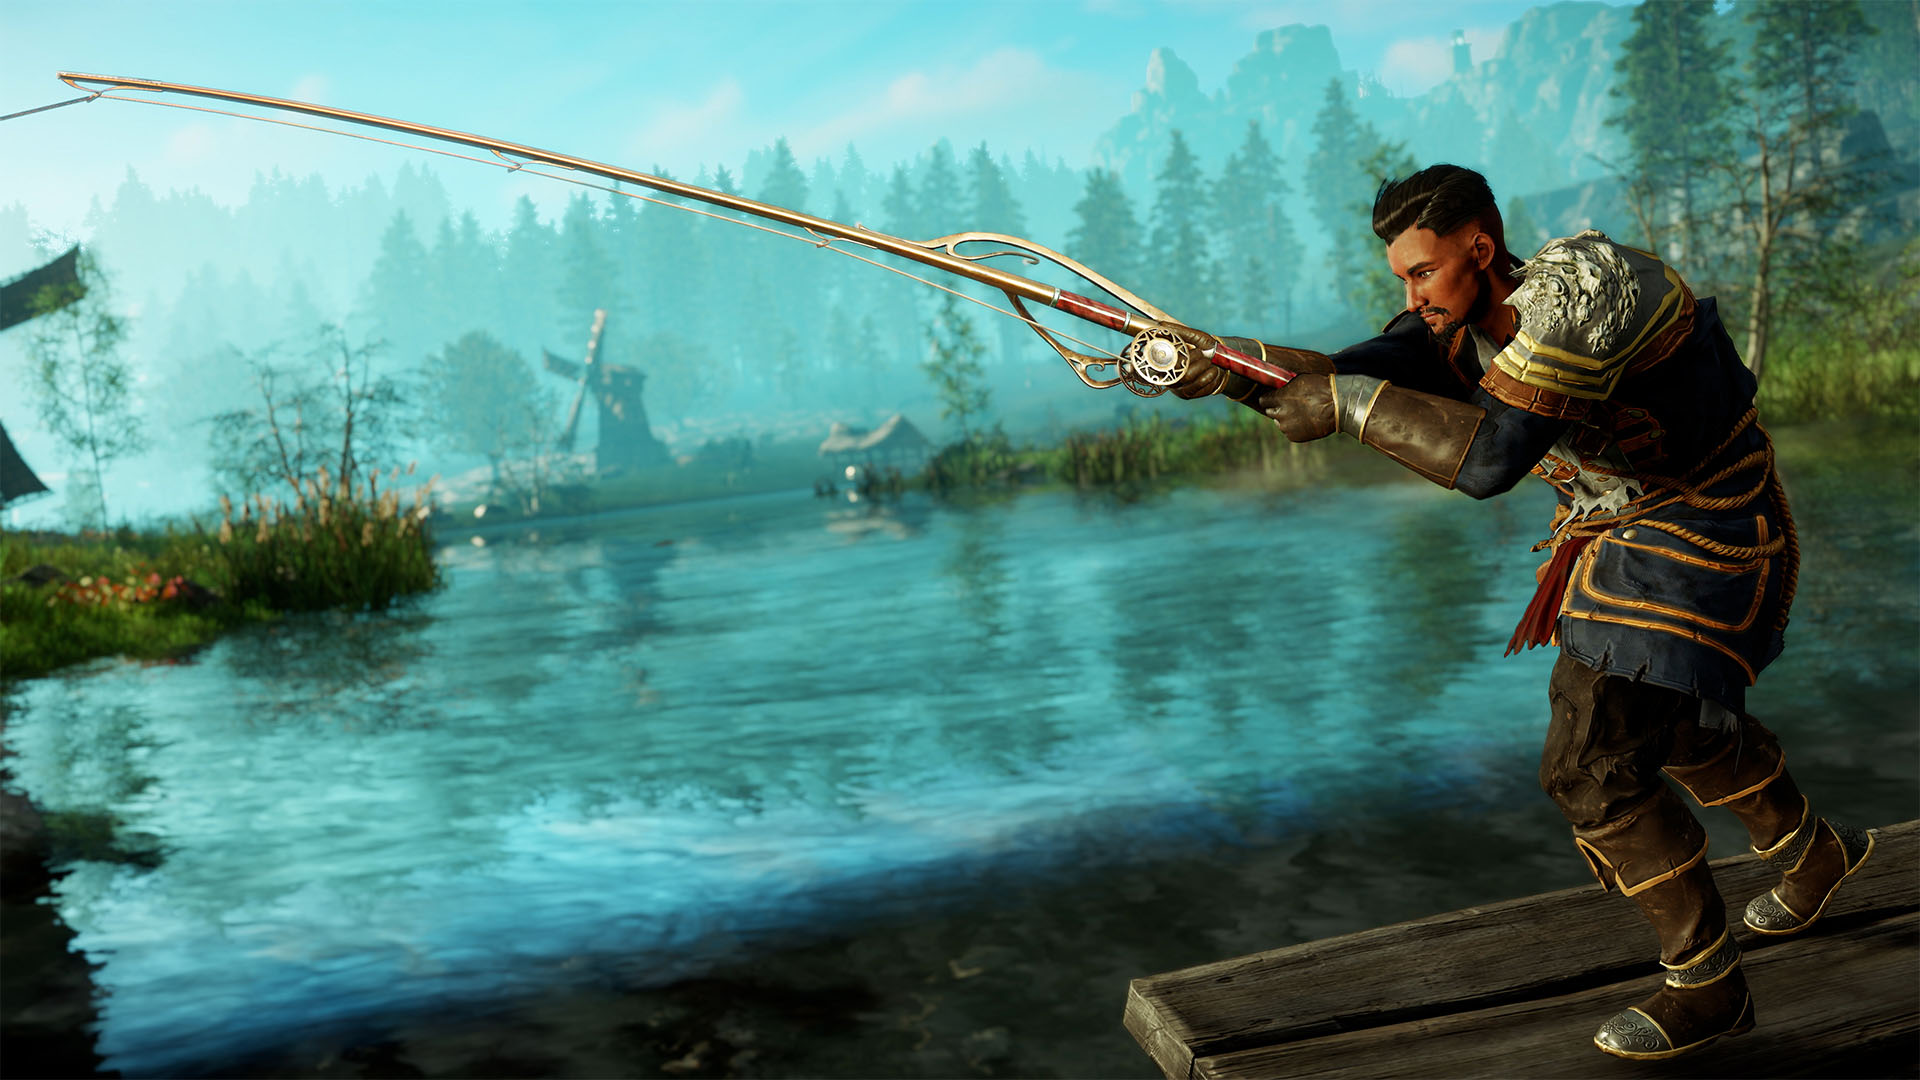 New World Fishing Guide - News  New World - Open World MMO PC Game